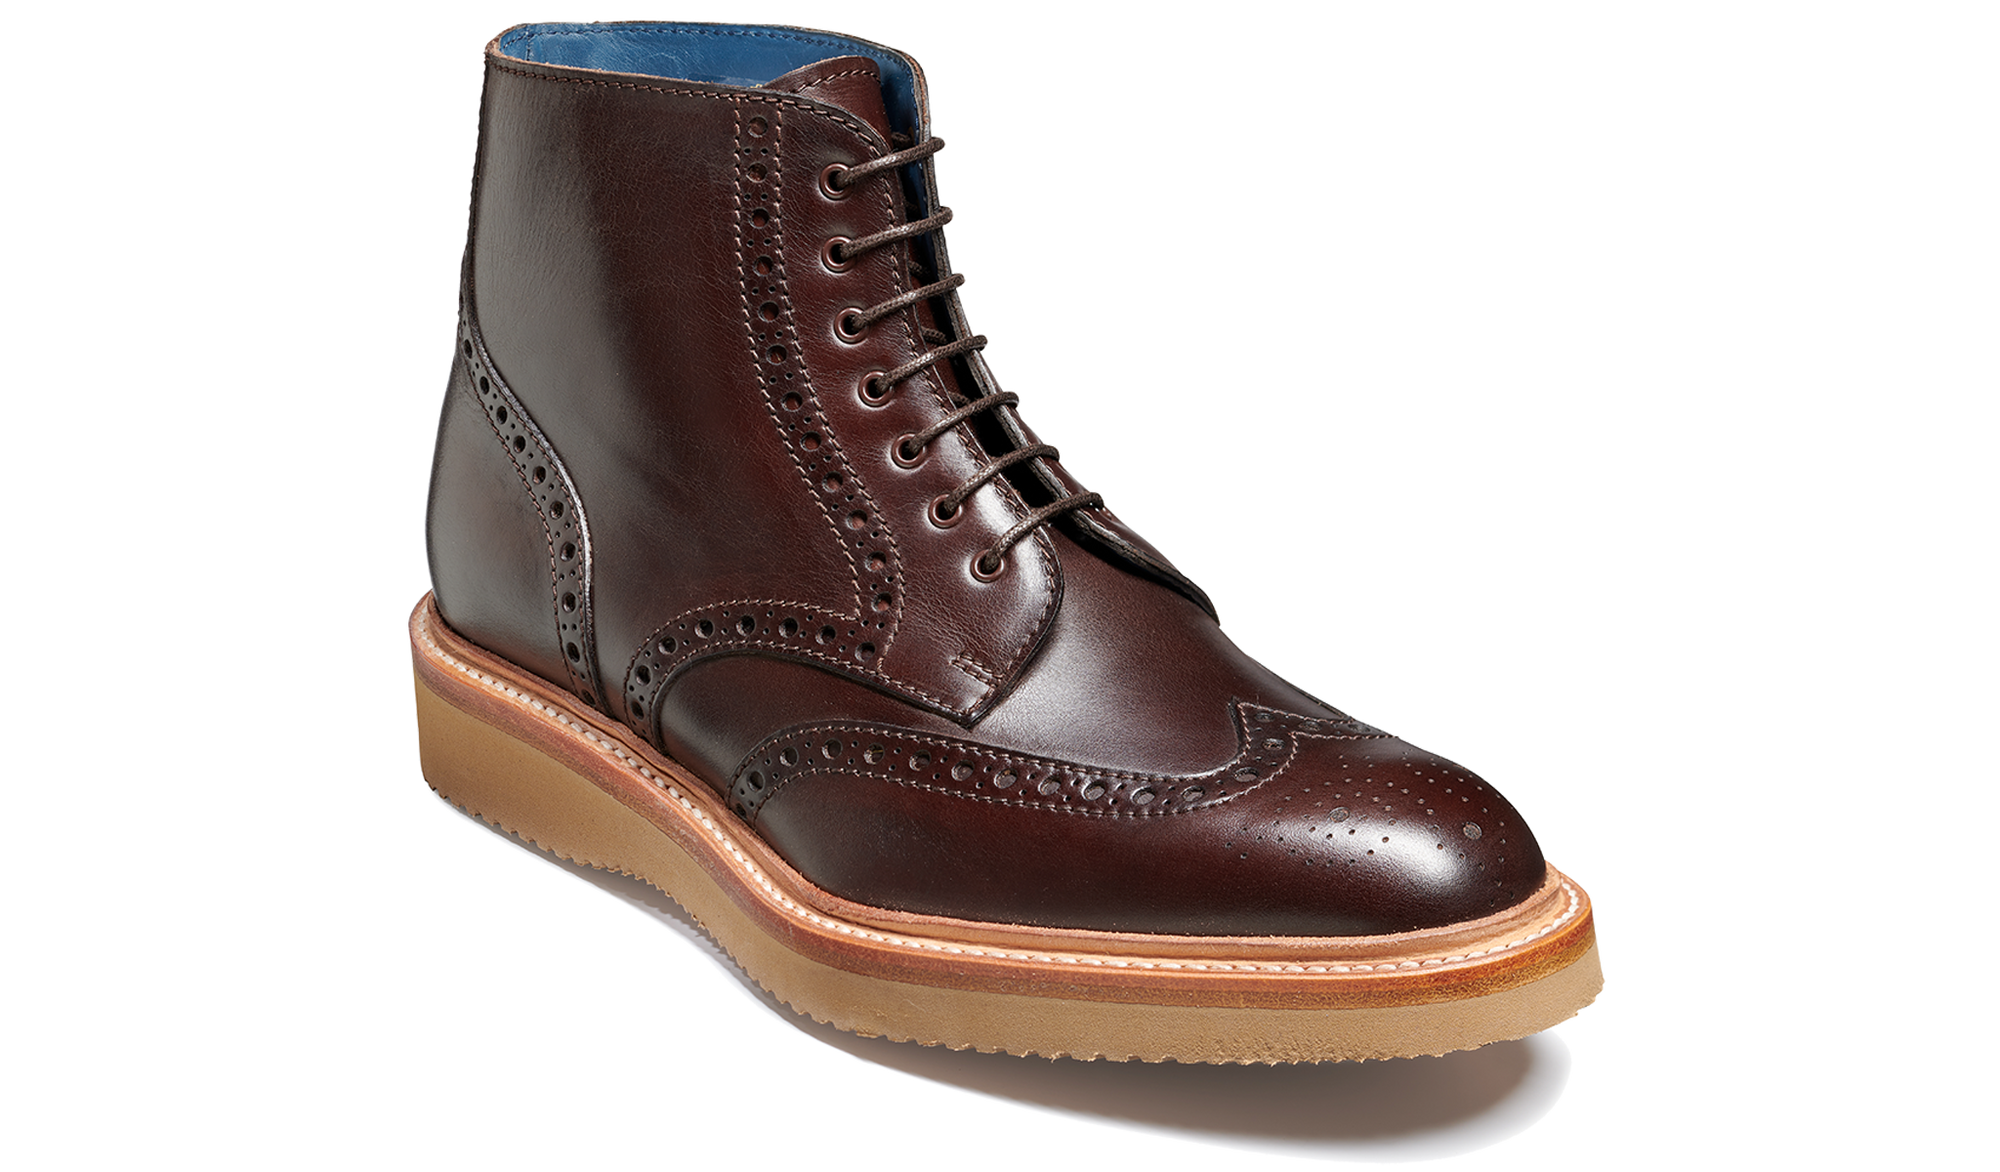 Barker Terry Brogue Boot - Chococlate Hand Painted